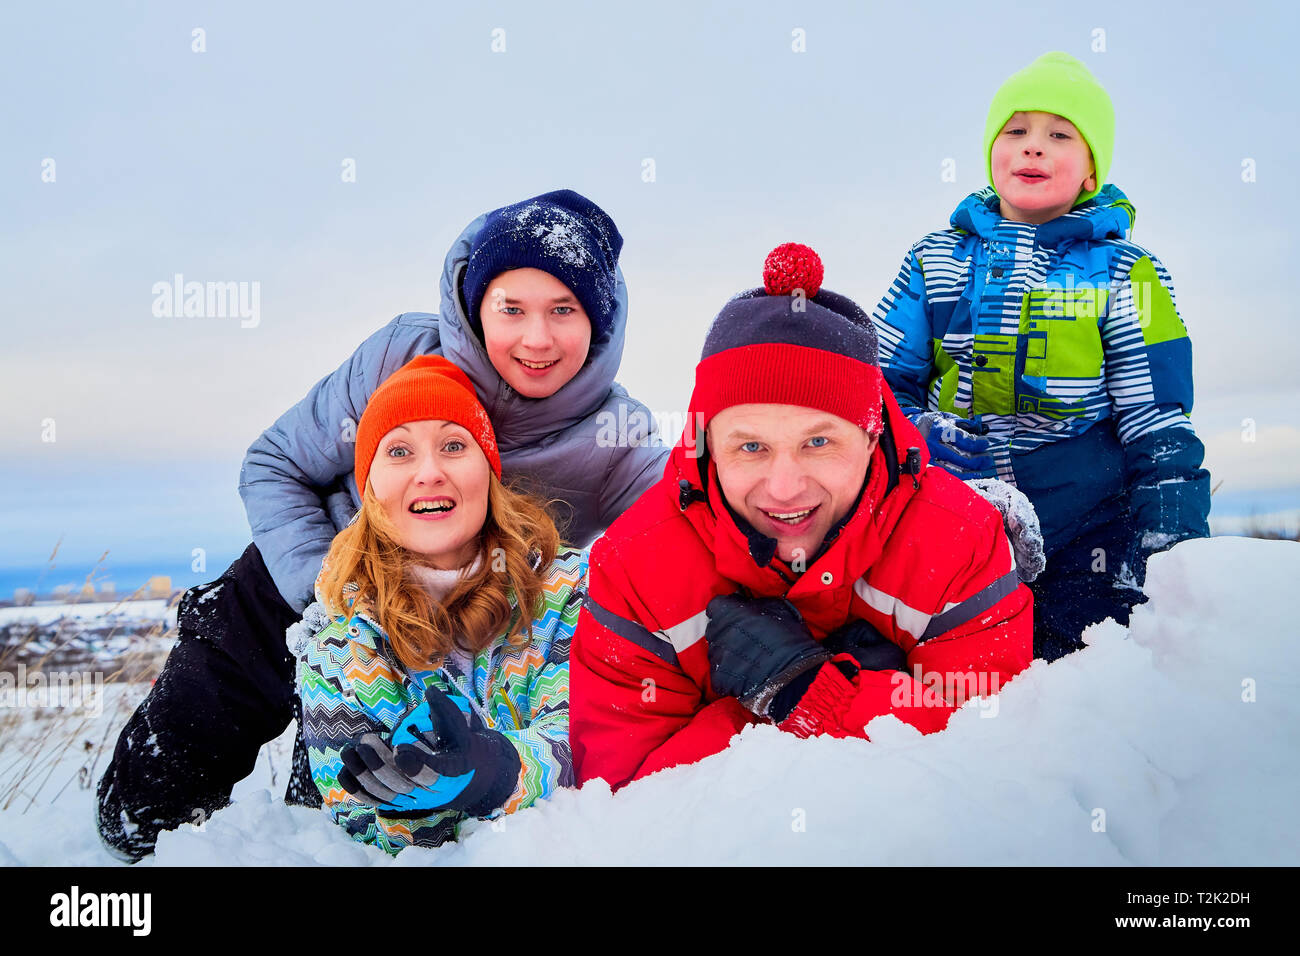 Portrait of a family with four people having fun in the snow. Dad, mom and two sons in winter day outdoor Stock Photo